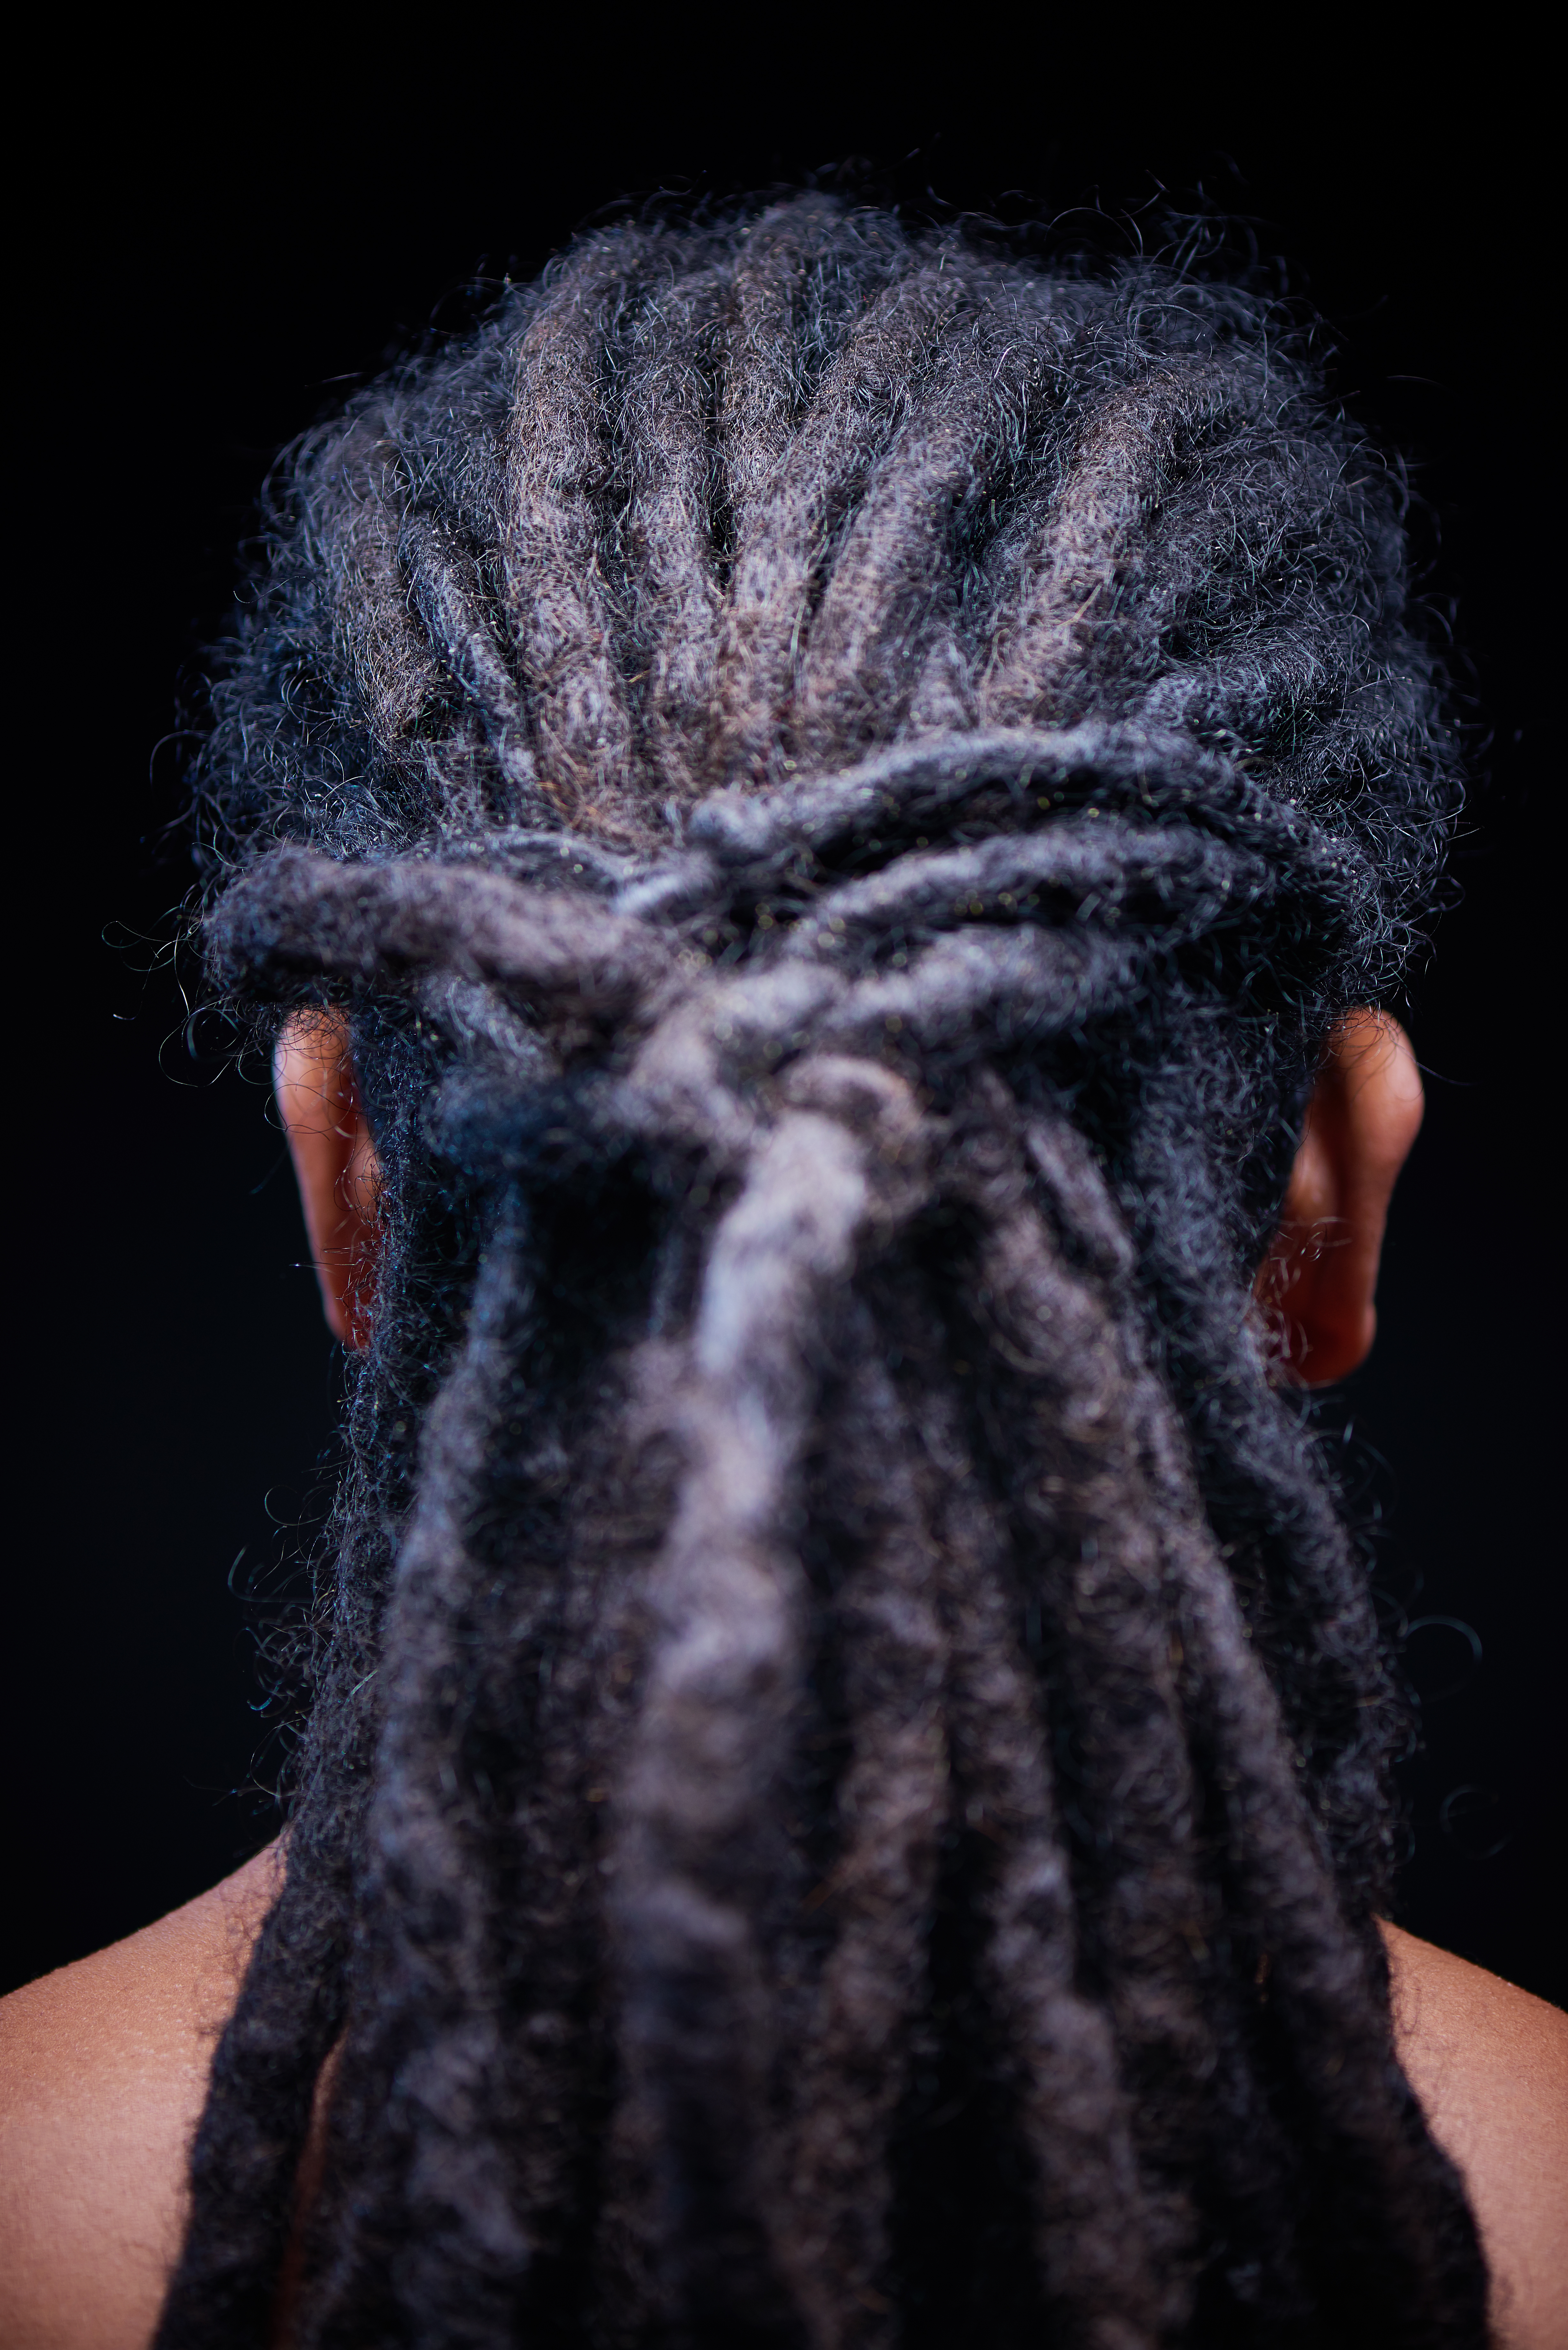 Rear view of a male with dreadlocks.